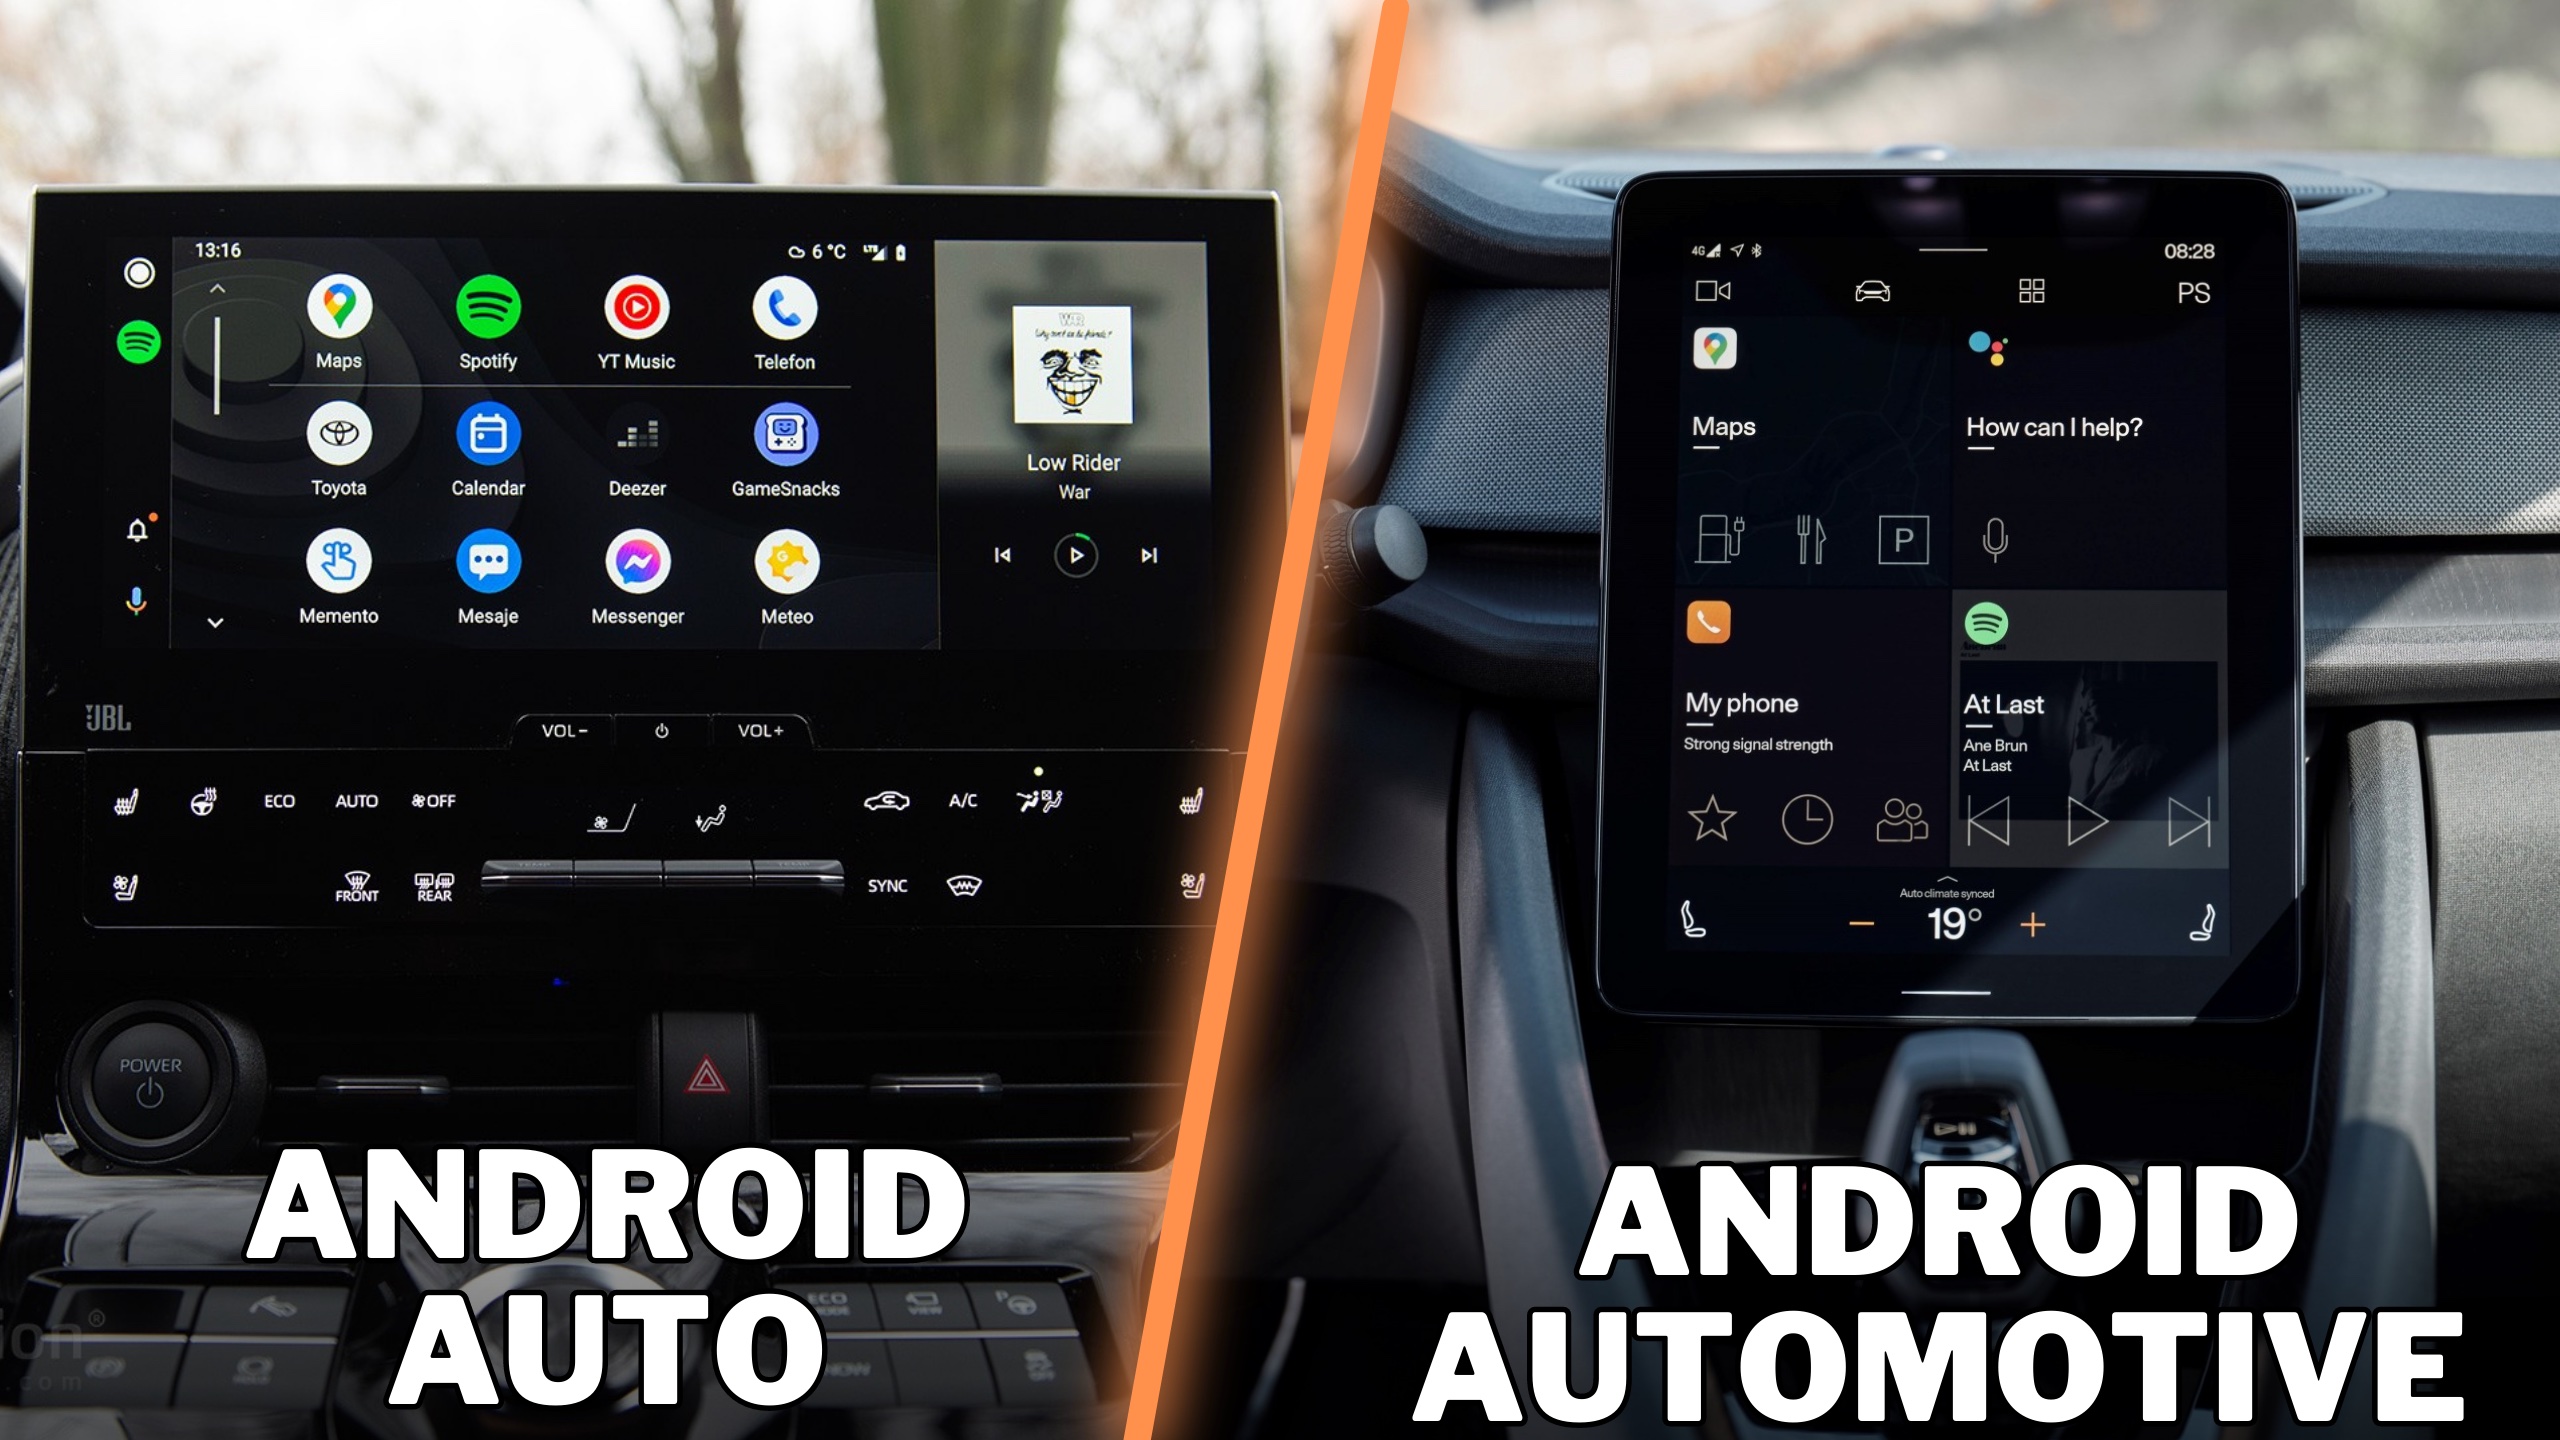 https://s1.cdn.autoevolution.com/images/news/volkswagen-unintentionally-demonstrated-android-auto-is-a-fantastic-concept-212363_1.jpg